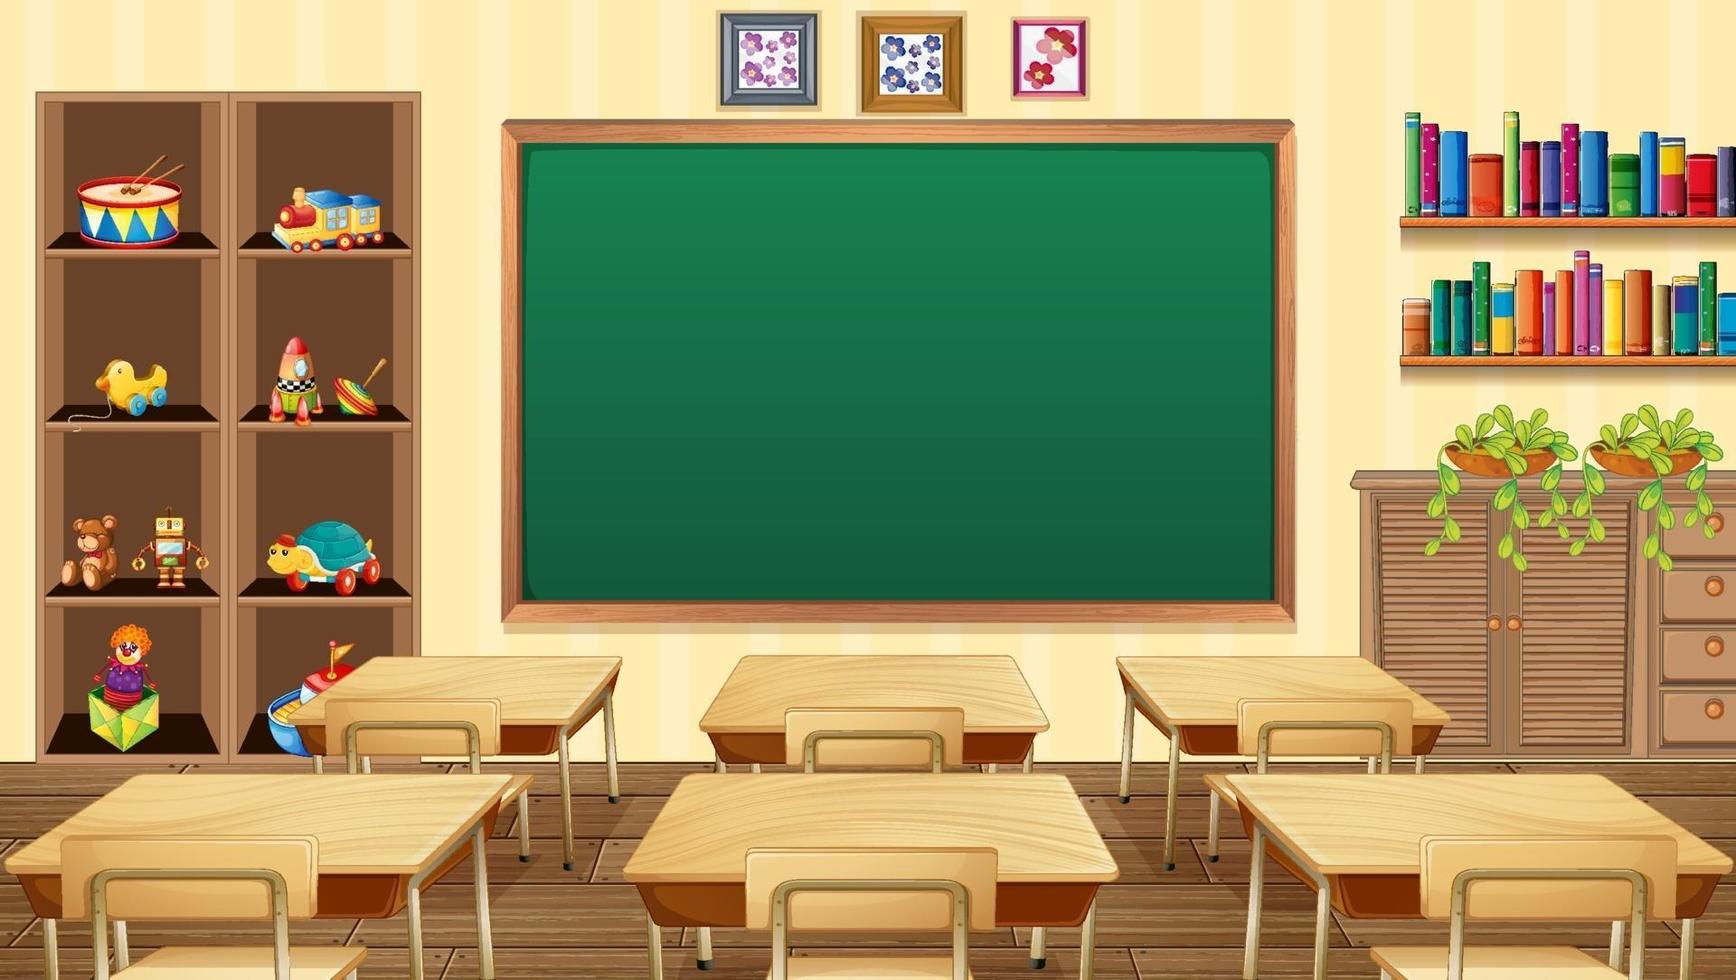 Empty classroom scene with interior decoration and objects vector